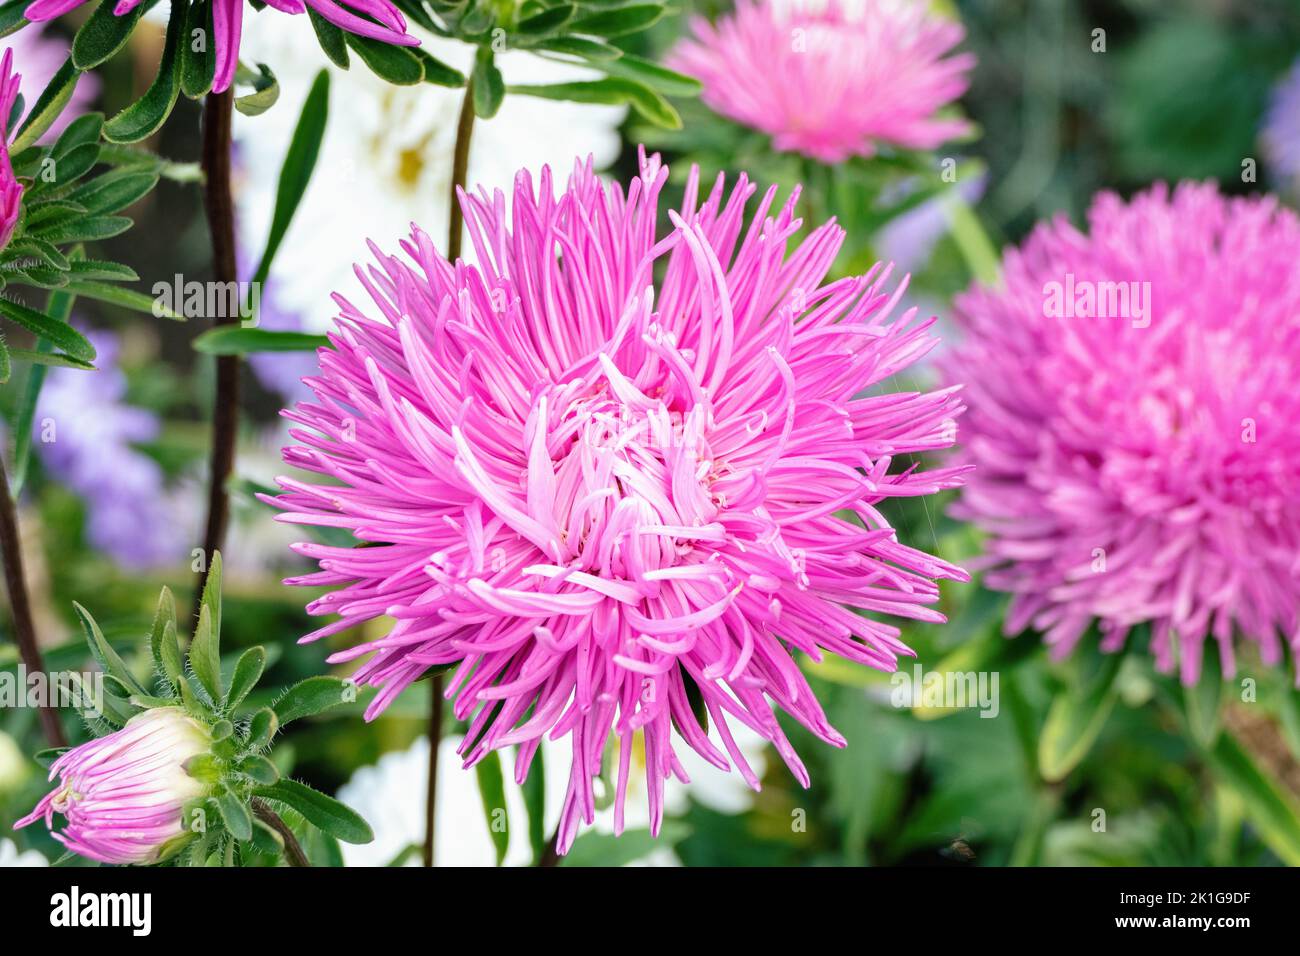 China Aster, Callistephus chinensis pink and white flowers in the garden Stock Photo